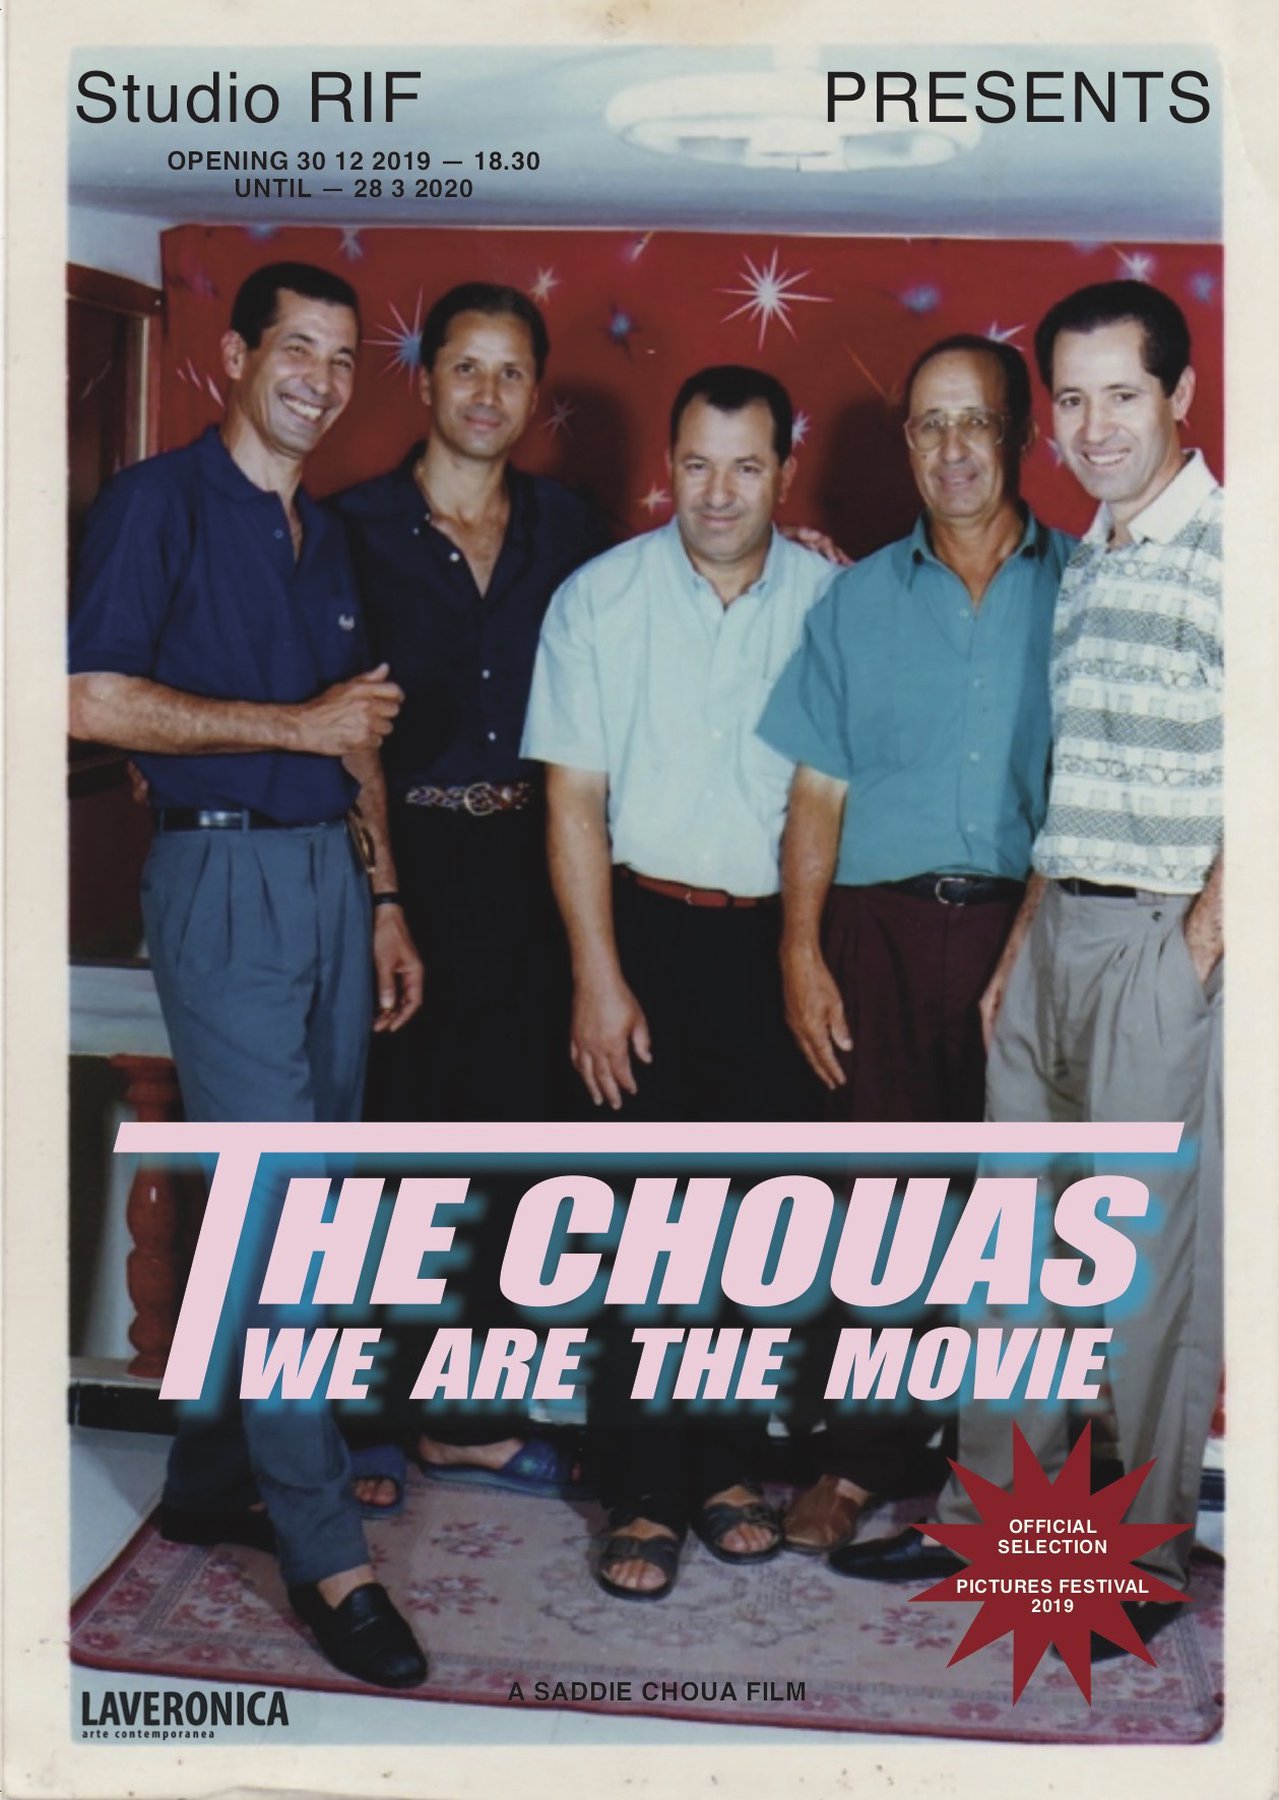 The Chouas - We are the movie!